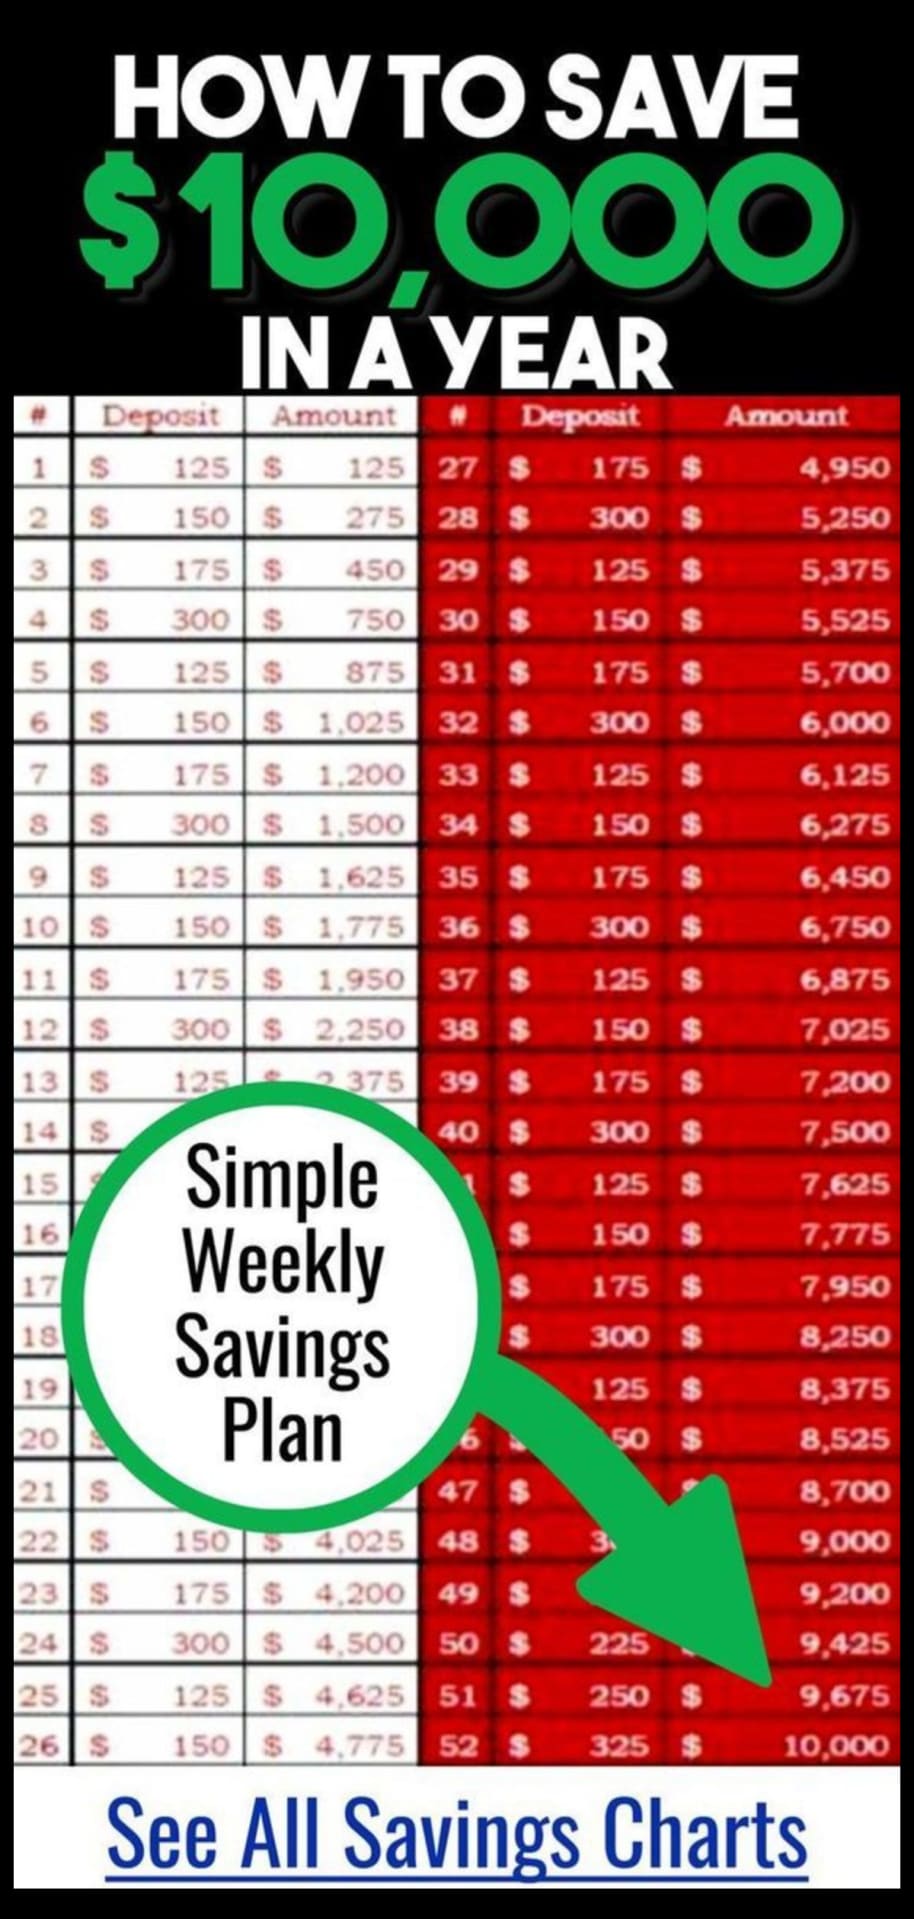 How To Save 10000 In a Year! This weekly savings chart will help you save money so you save $10,000 in one year. It's a Money Saving Challenge 30 Day Money Management Plan and is one of the ways to save money even if you're broke